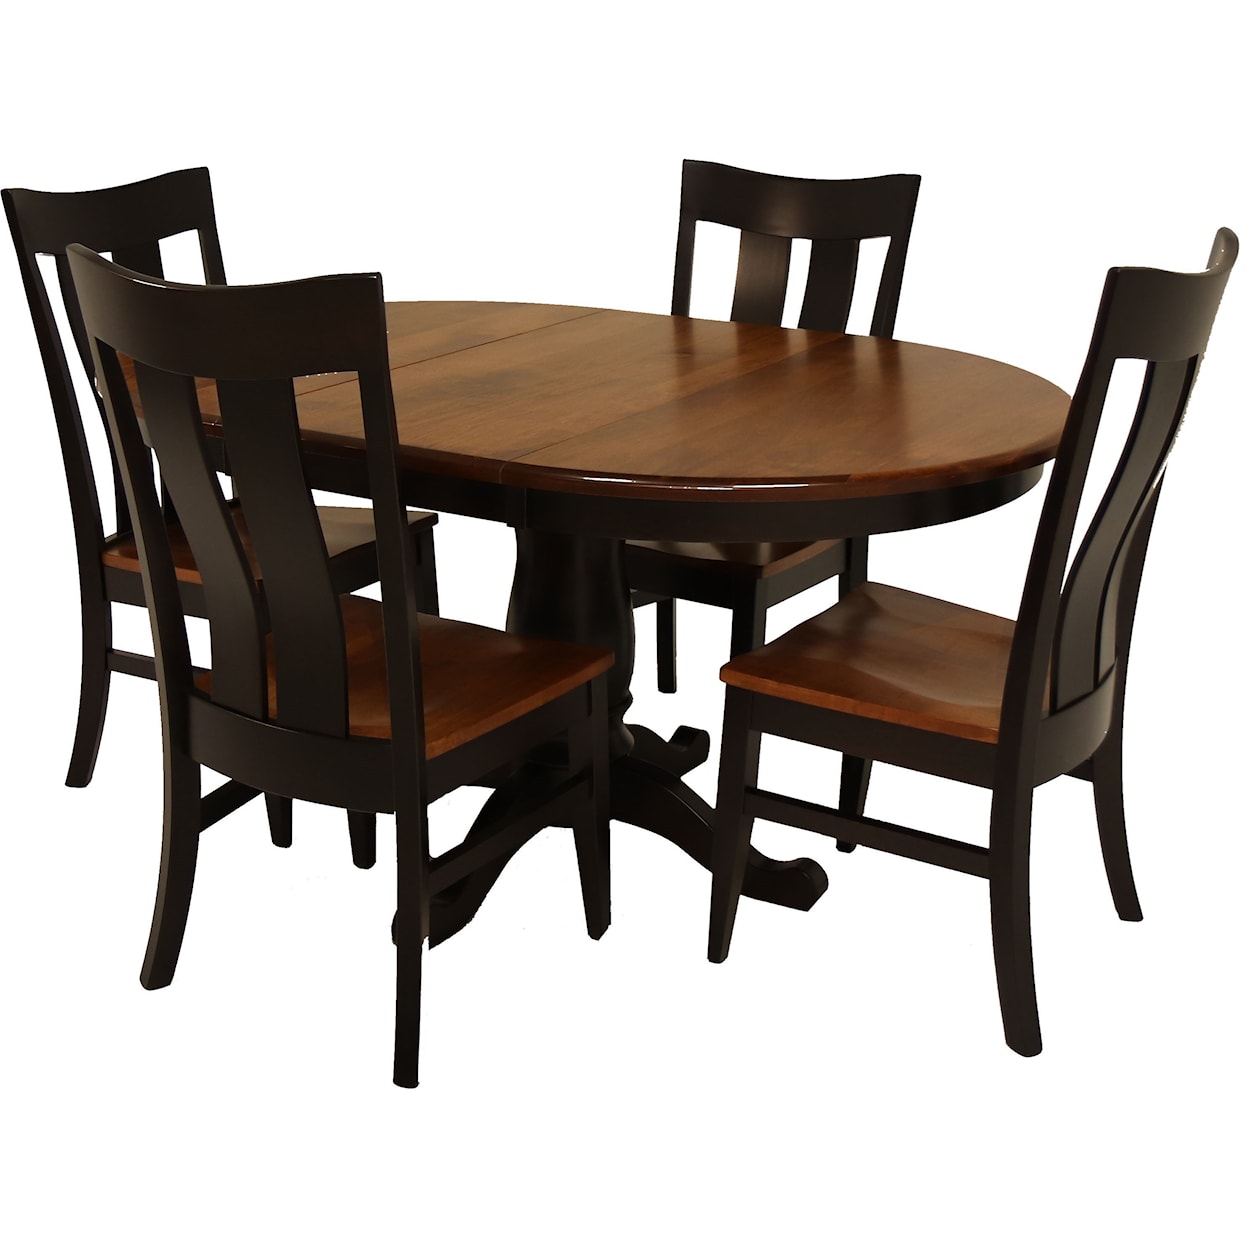 Archbold Furniture Amish Essentials Casual Dining 5 Piece Rebecca Table and Florence Chair Set